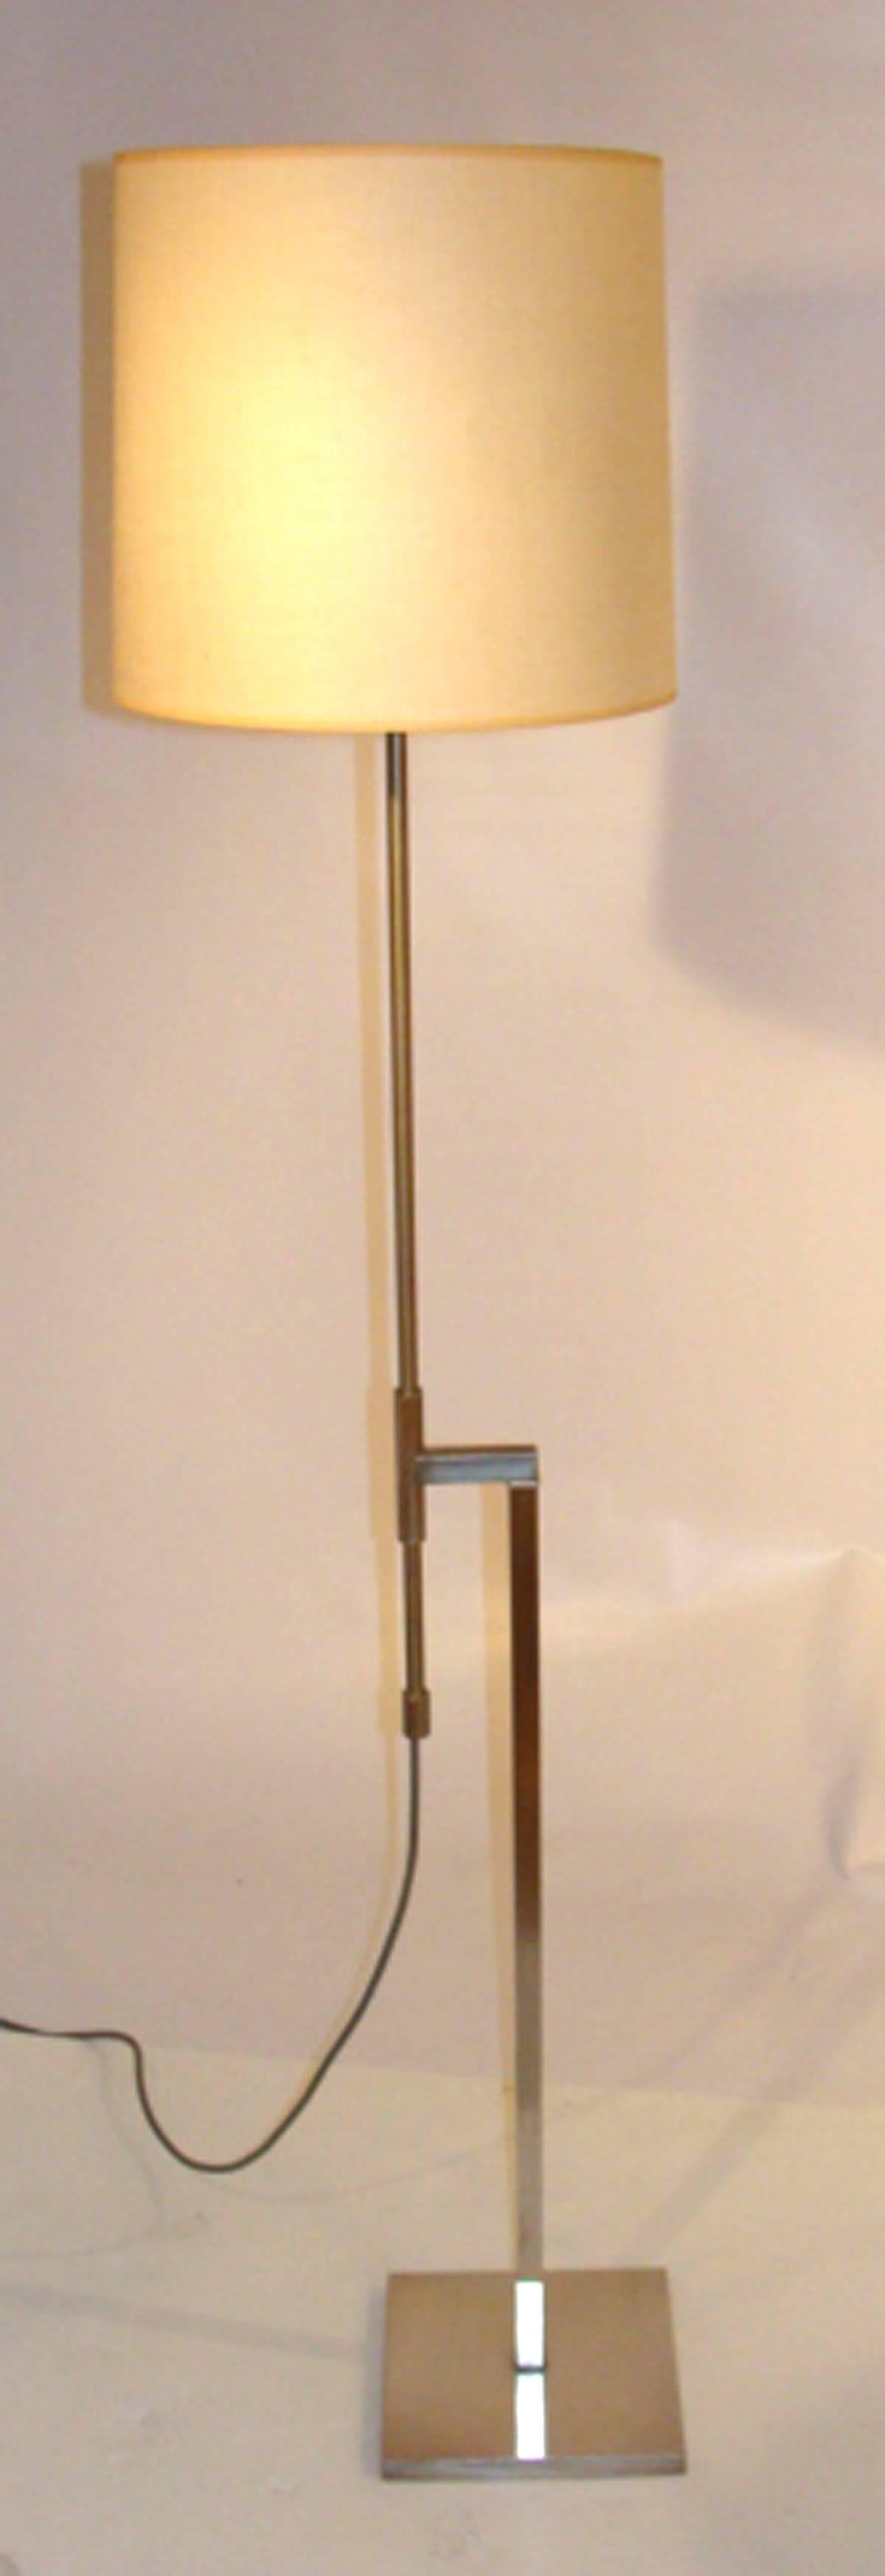 Outstanding adjustable height floor lamp by Laurel Lamp Co. having original shade, harp and finial. Superb original condition.